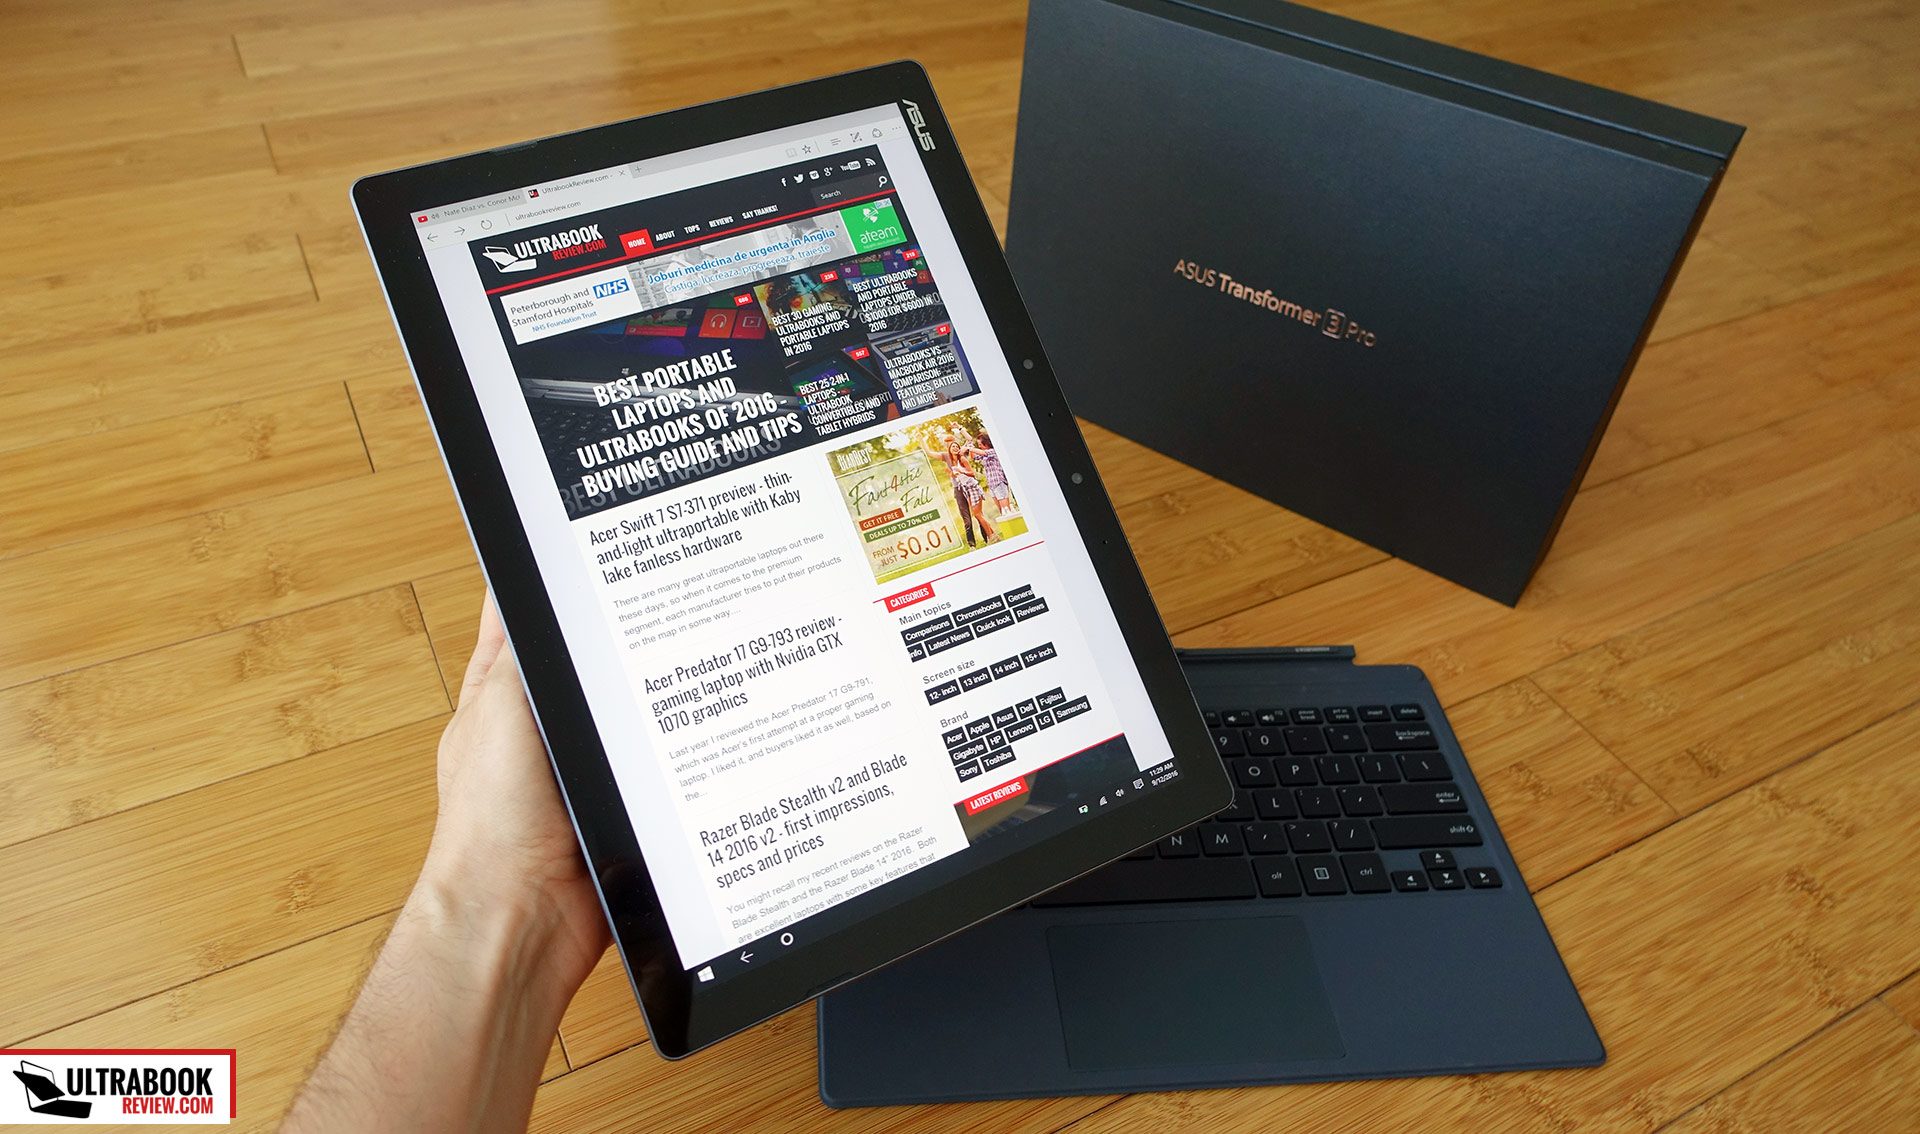 The Asus Transformer 3 Pro is primarily a tablet, with a secondary laptop role with the help of the included Keyboard Folio